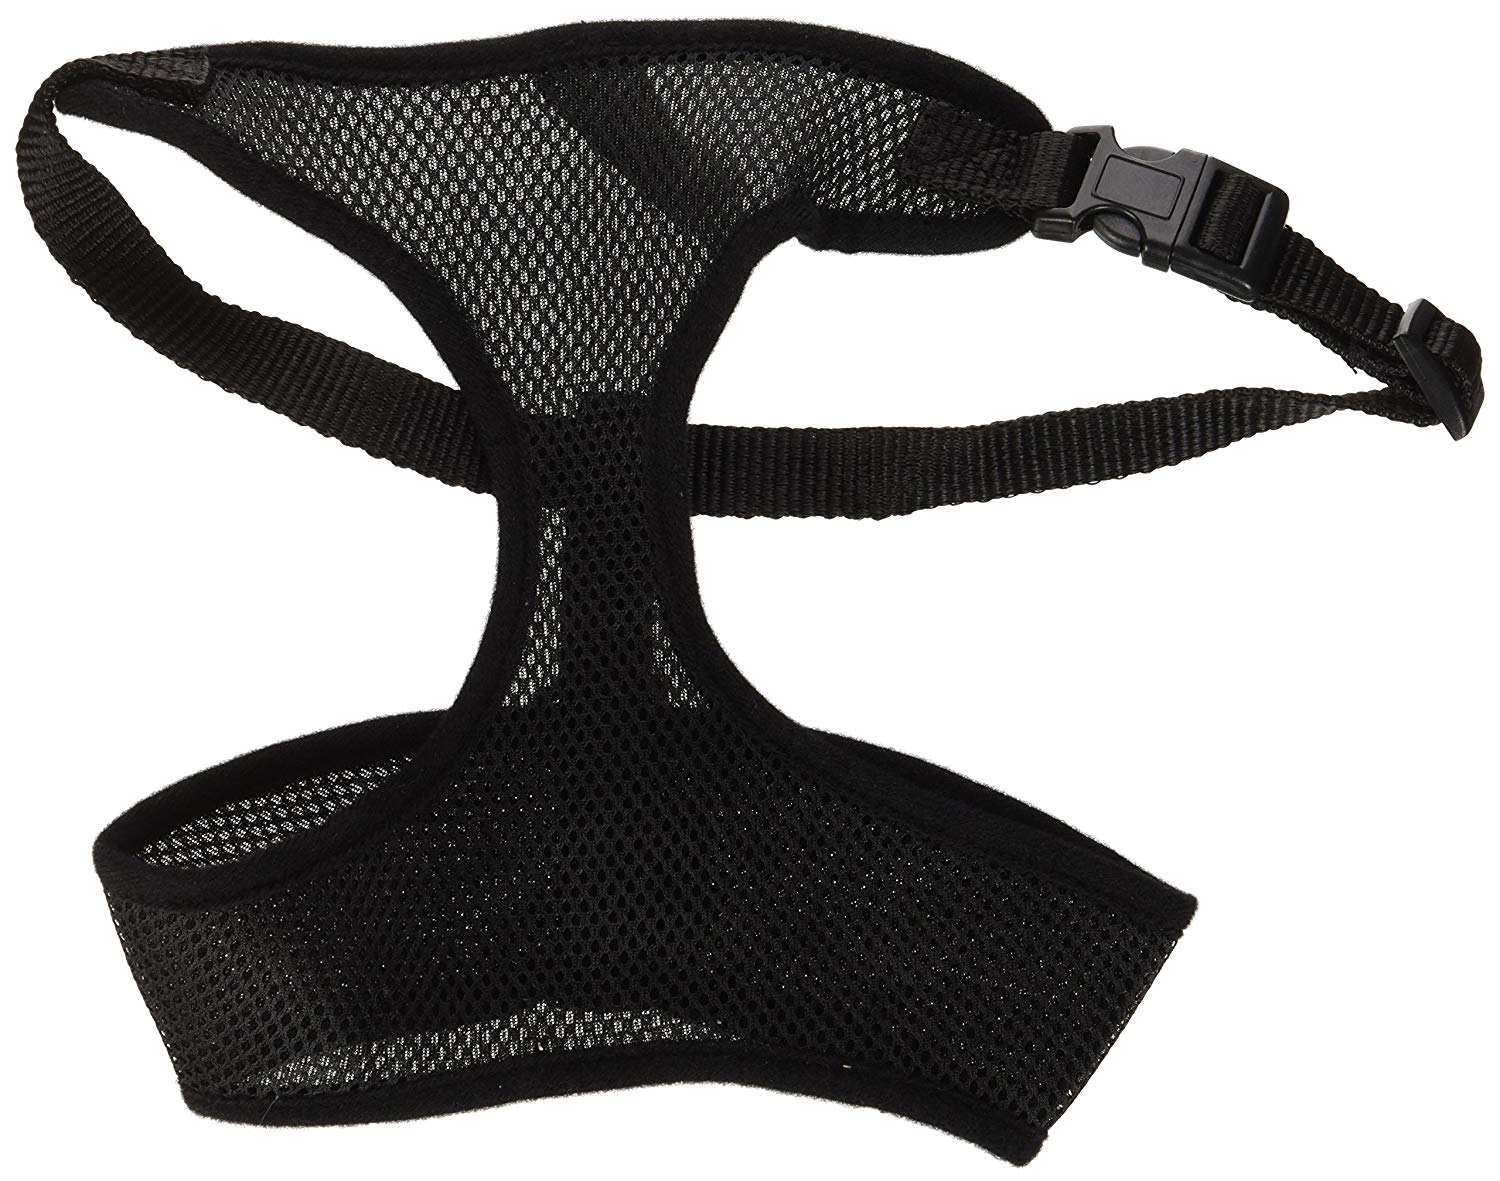 Four Paws Comfort Control Harness XL Black